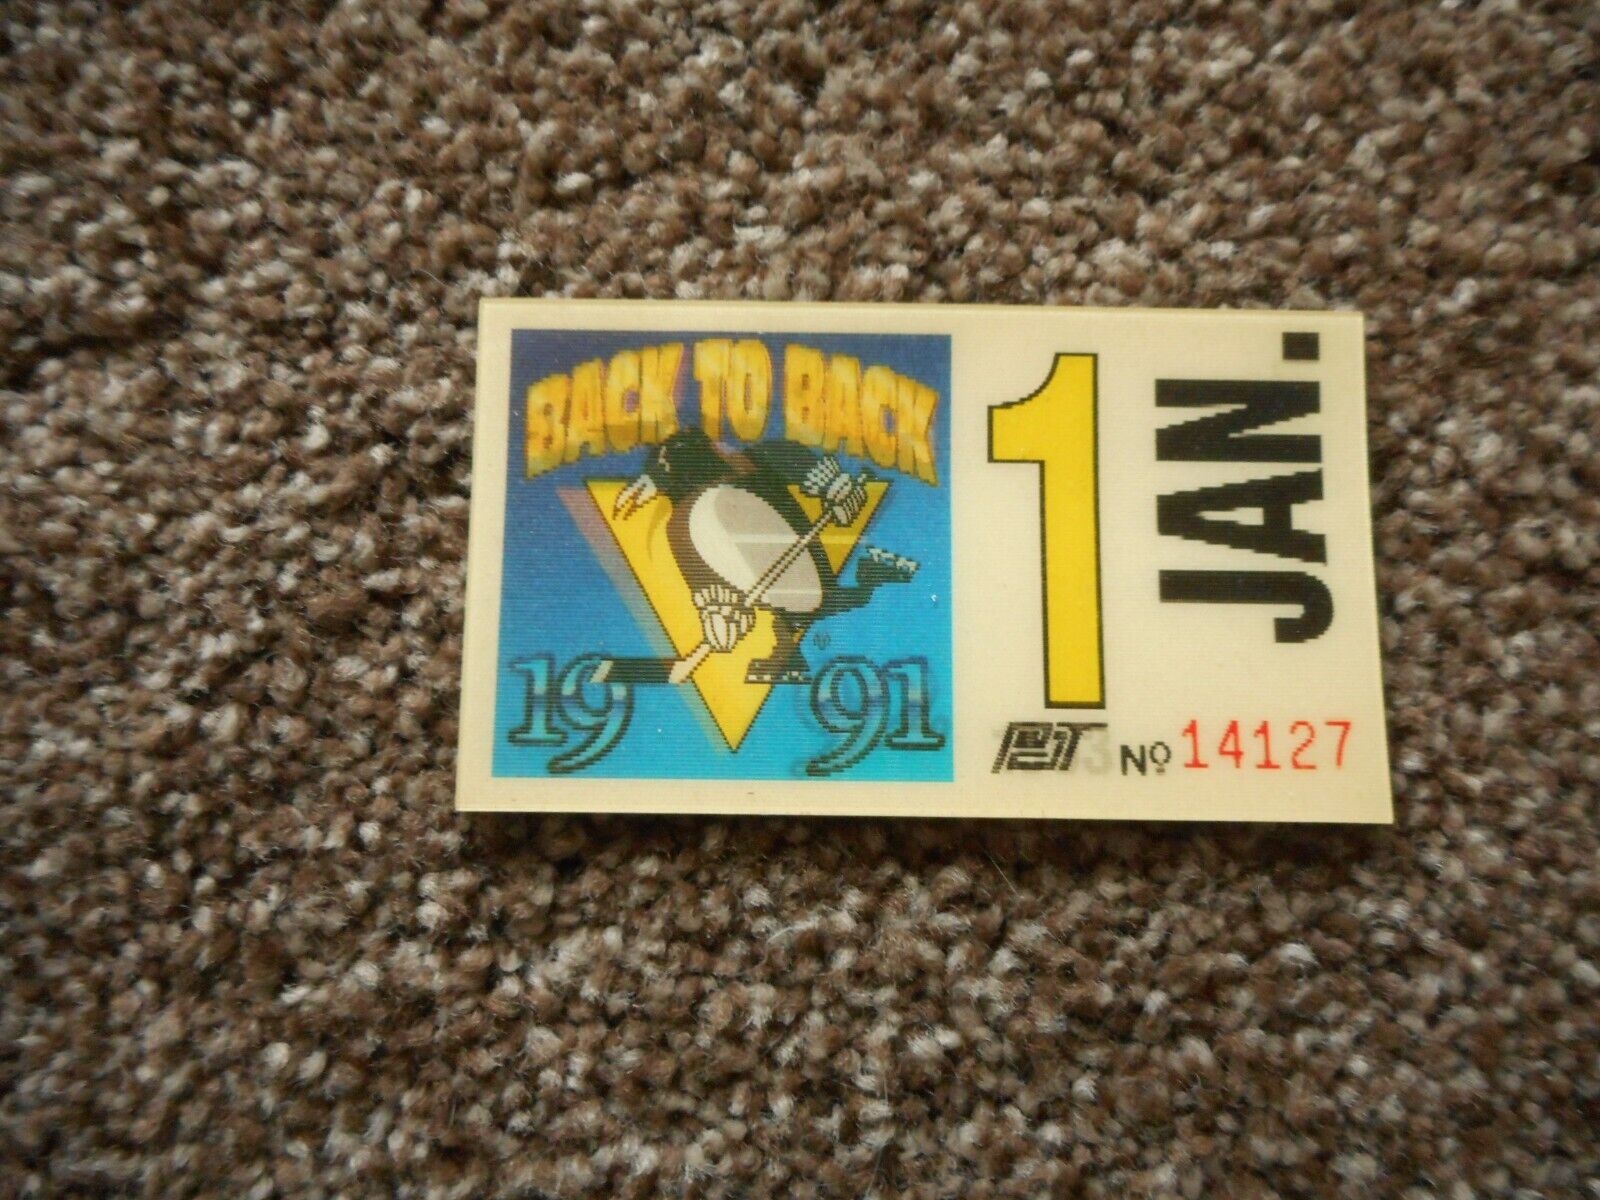 PITTSBURGH PENGUINS 3-D TROLLEY PASS ADVERTISING THE STANLEY CUP WIN FROM 1992 